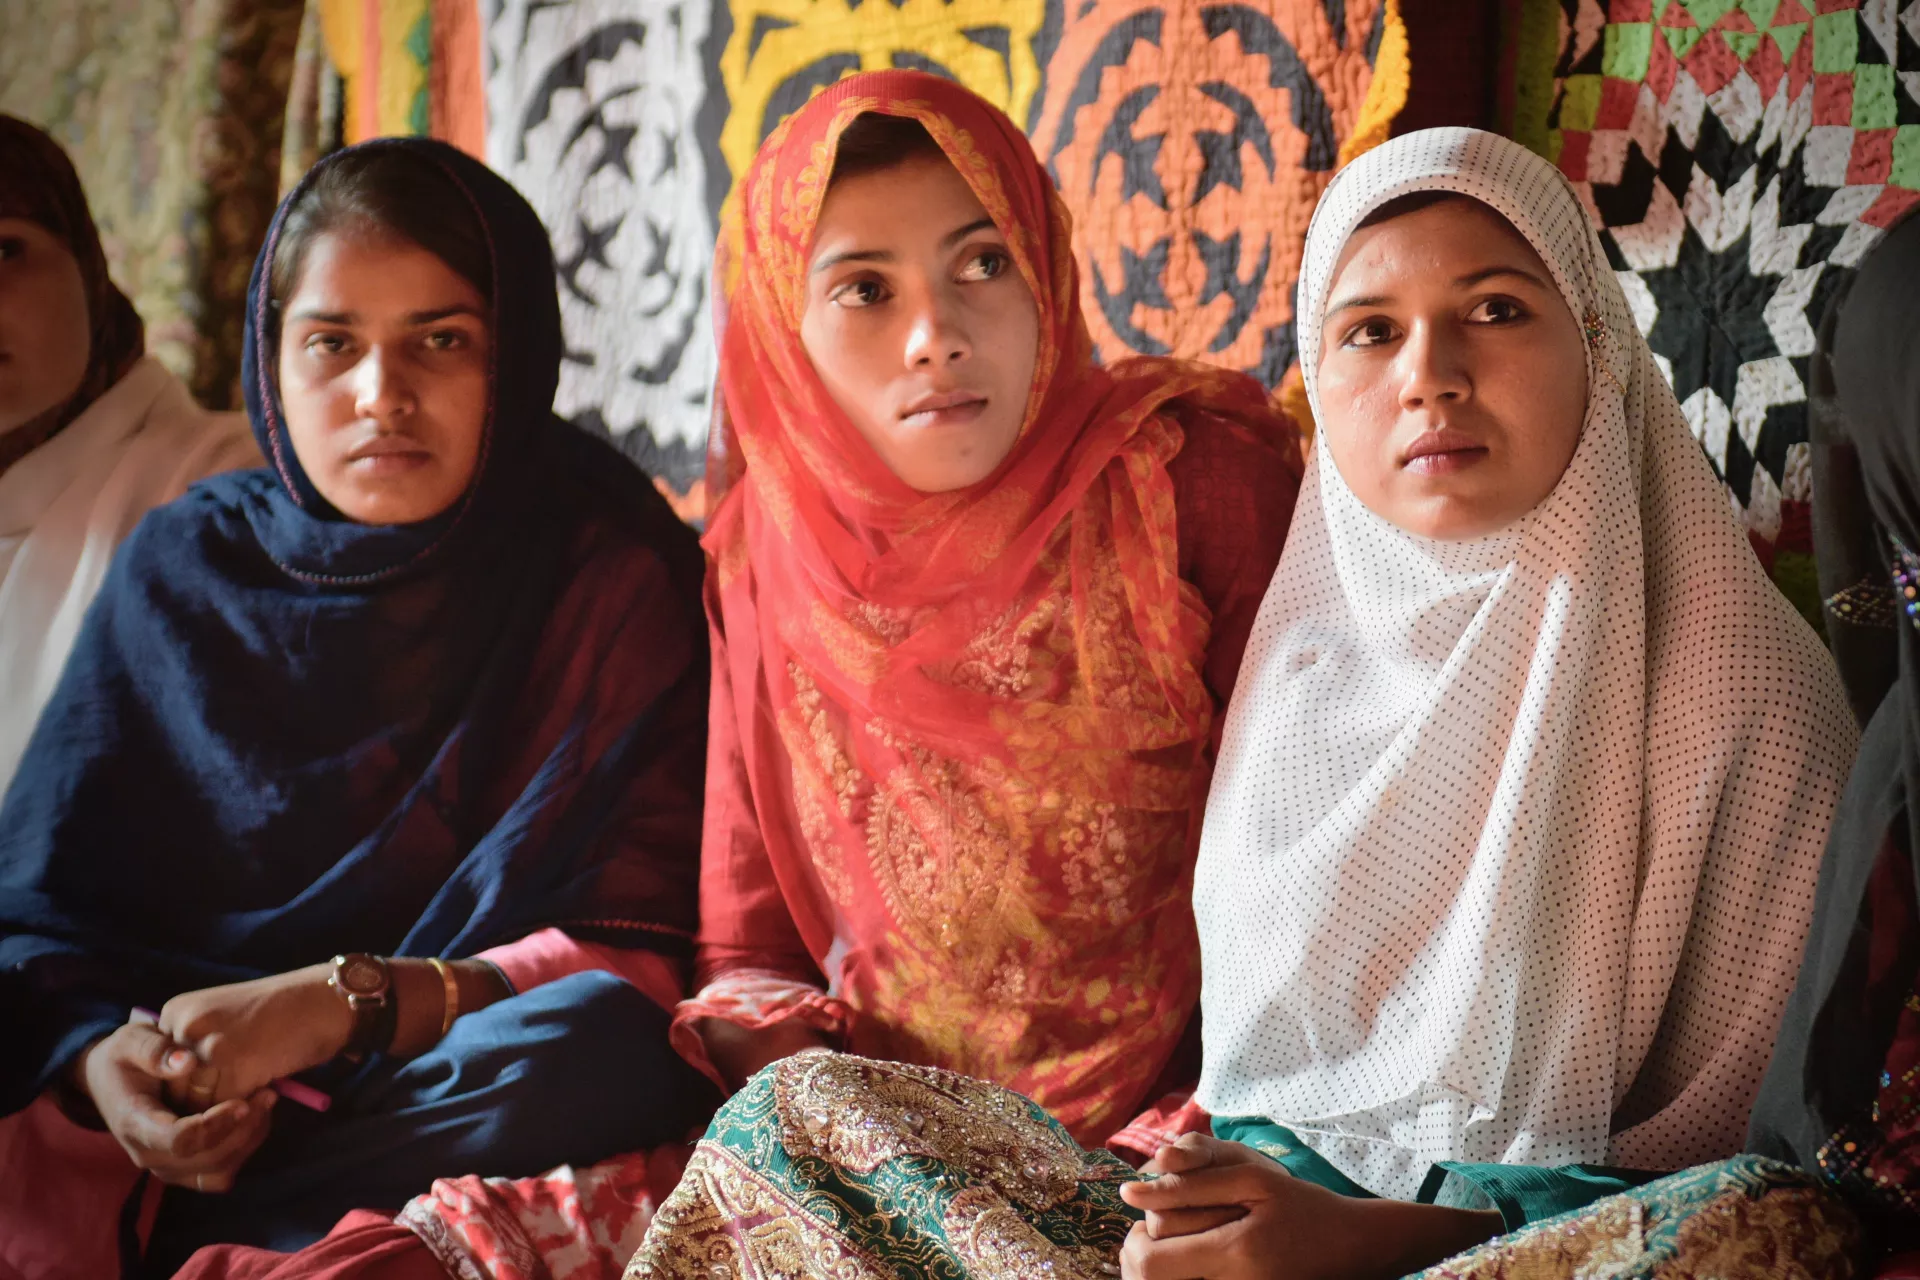 3 young girls from Pakistan looking at the camera